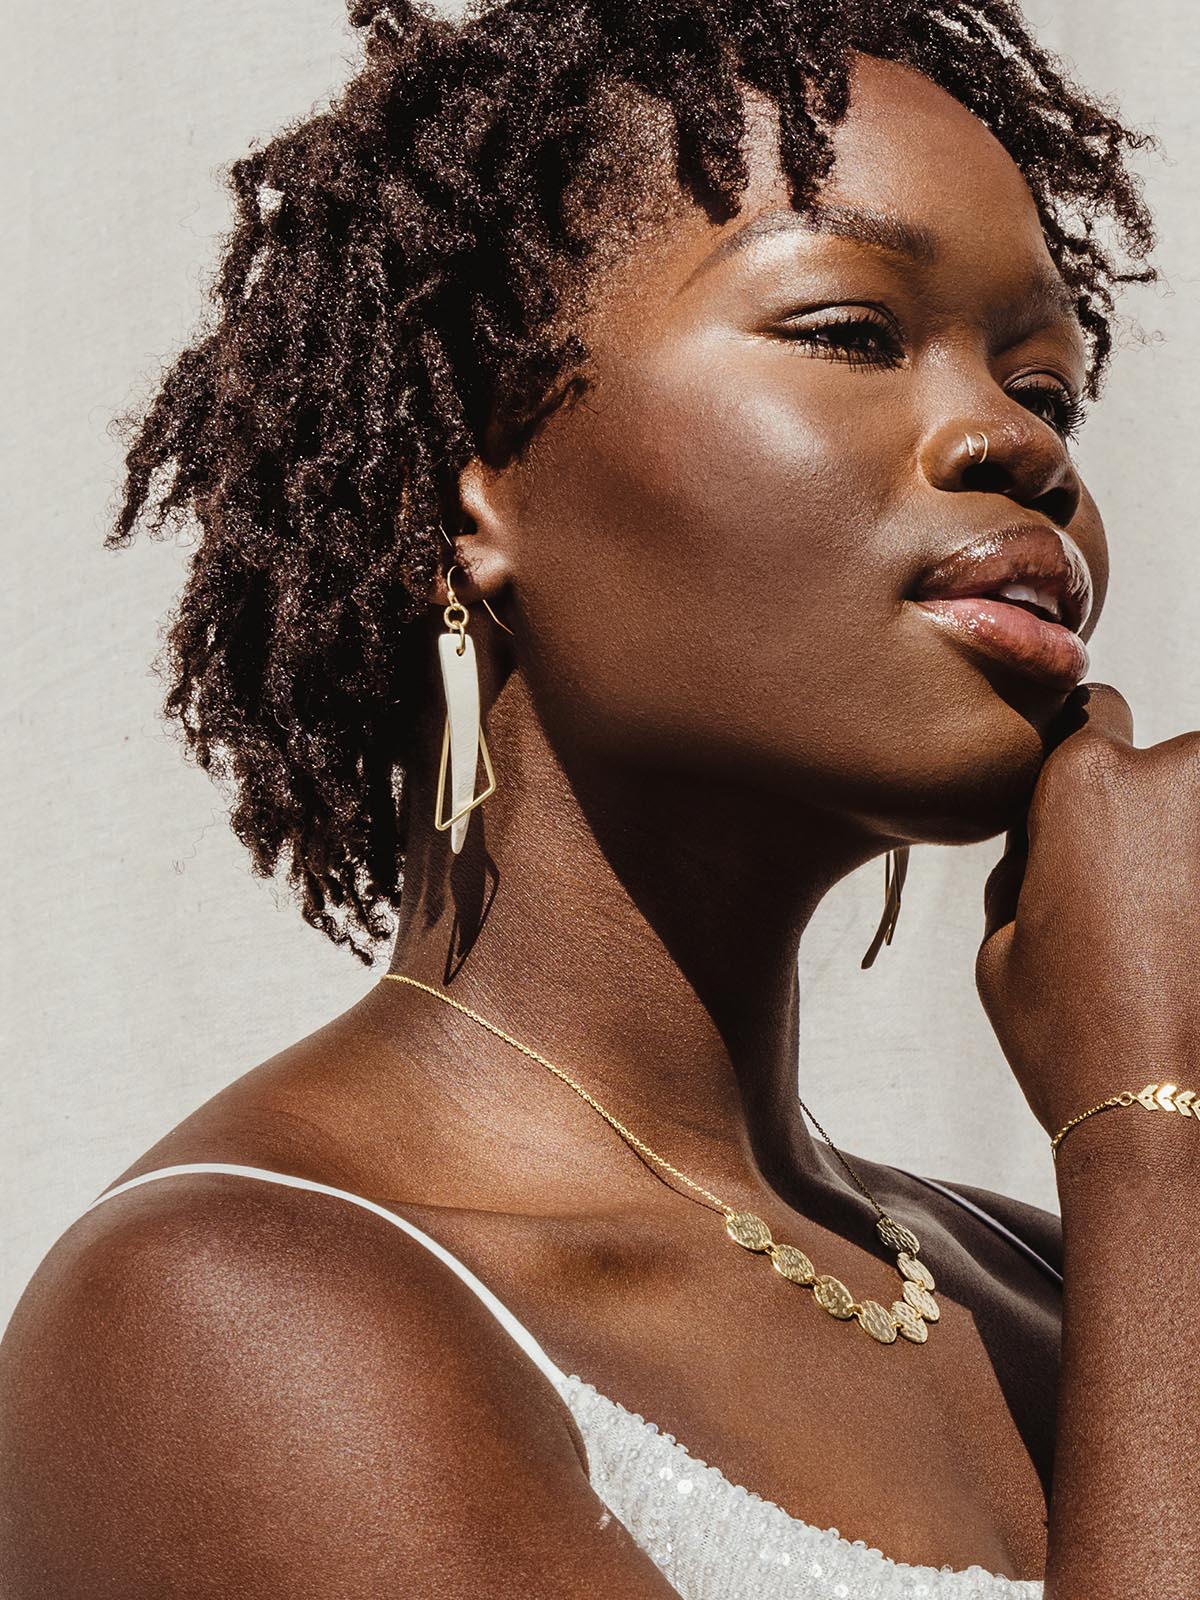 Earrings with white triangular dangle layered with thin gold triangular dangle on a female model. Model is wearing other gold jewelry items like necklace and bracelet. 